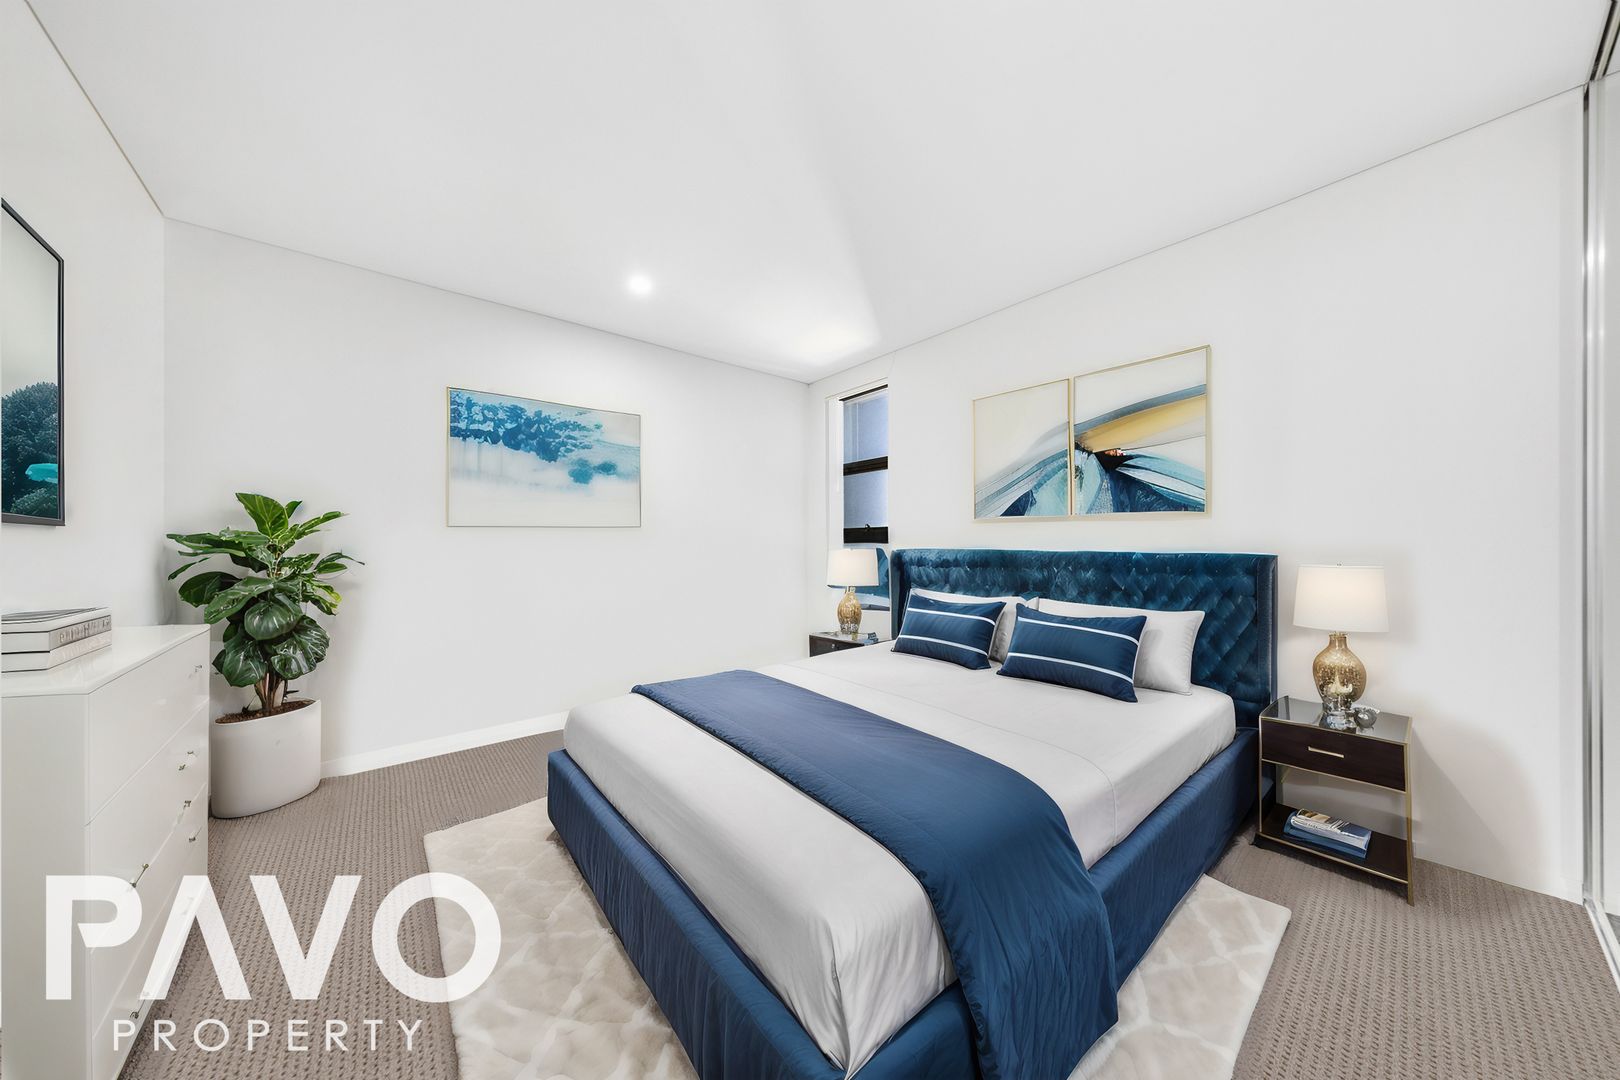 Carlingford, New South Wales, 2 Bedrooms Bedrooms, ,2 BathroomsBathrooms,Apartment,For Sale,1031